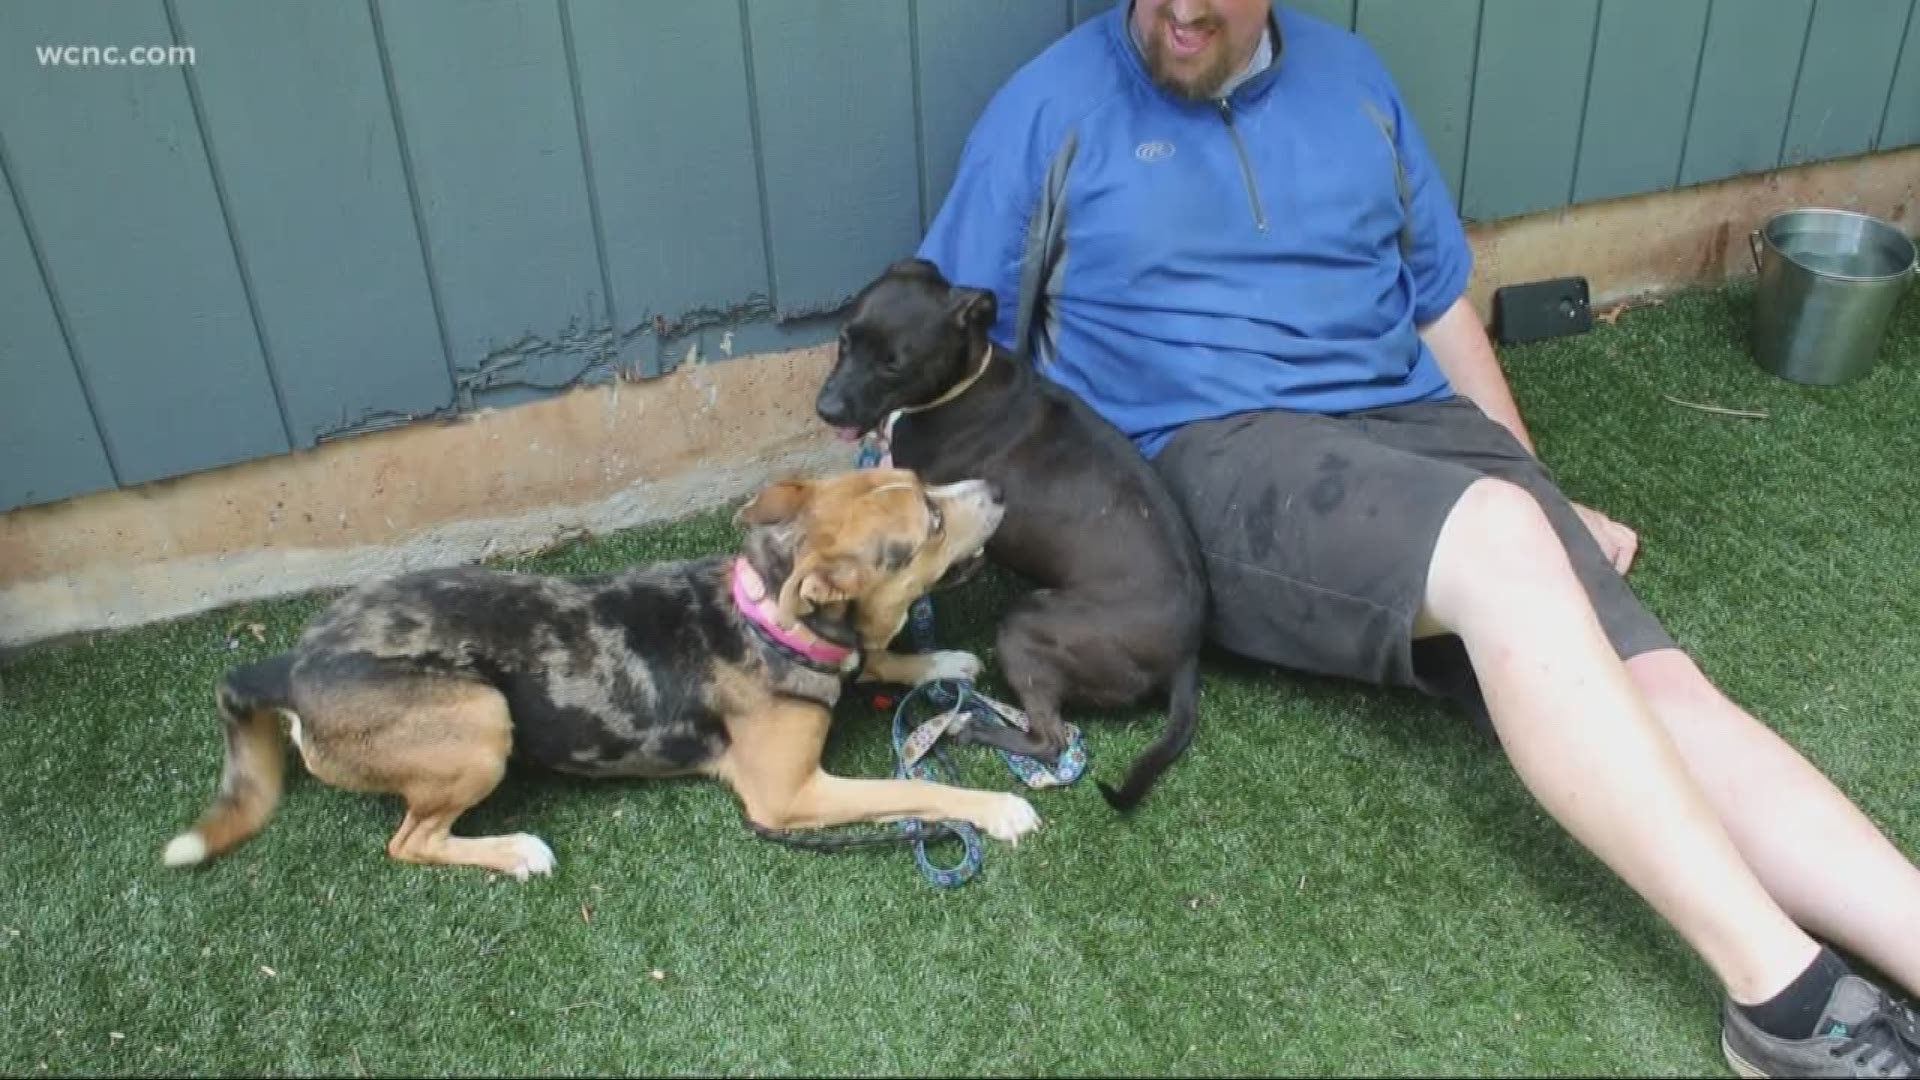 Liv, London, and Balto ended up in the Queen City this week because their shelter, the Humane Society of Louisiana, needed to make room for other animals rescued during the storm.